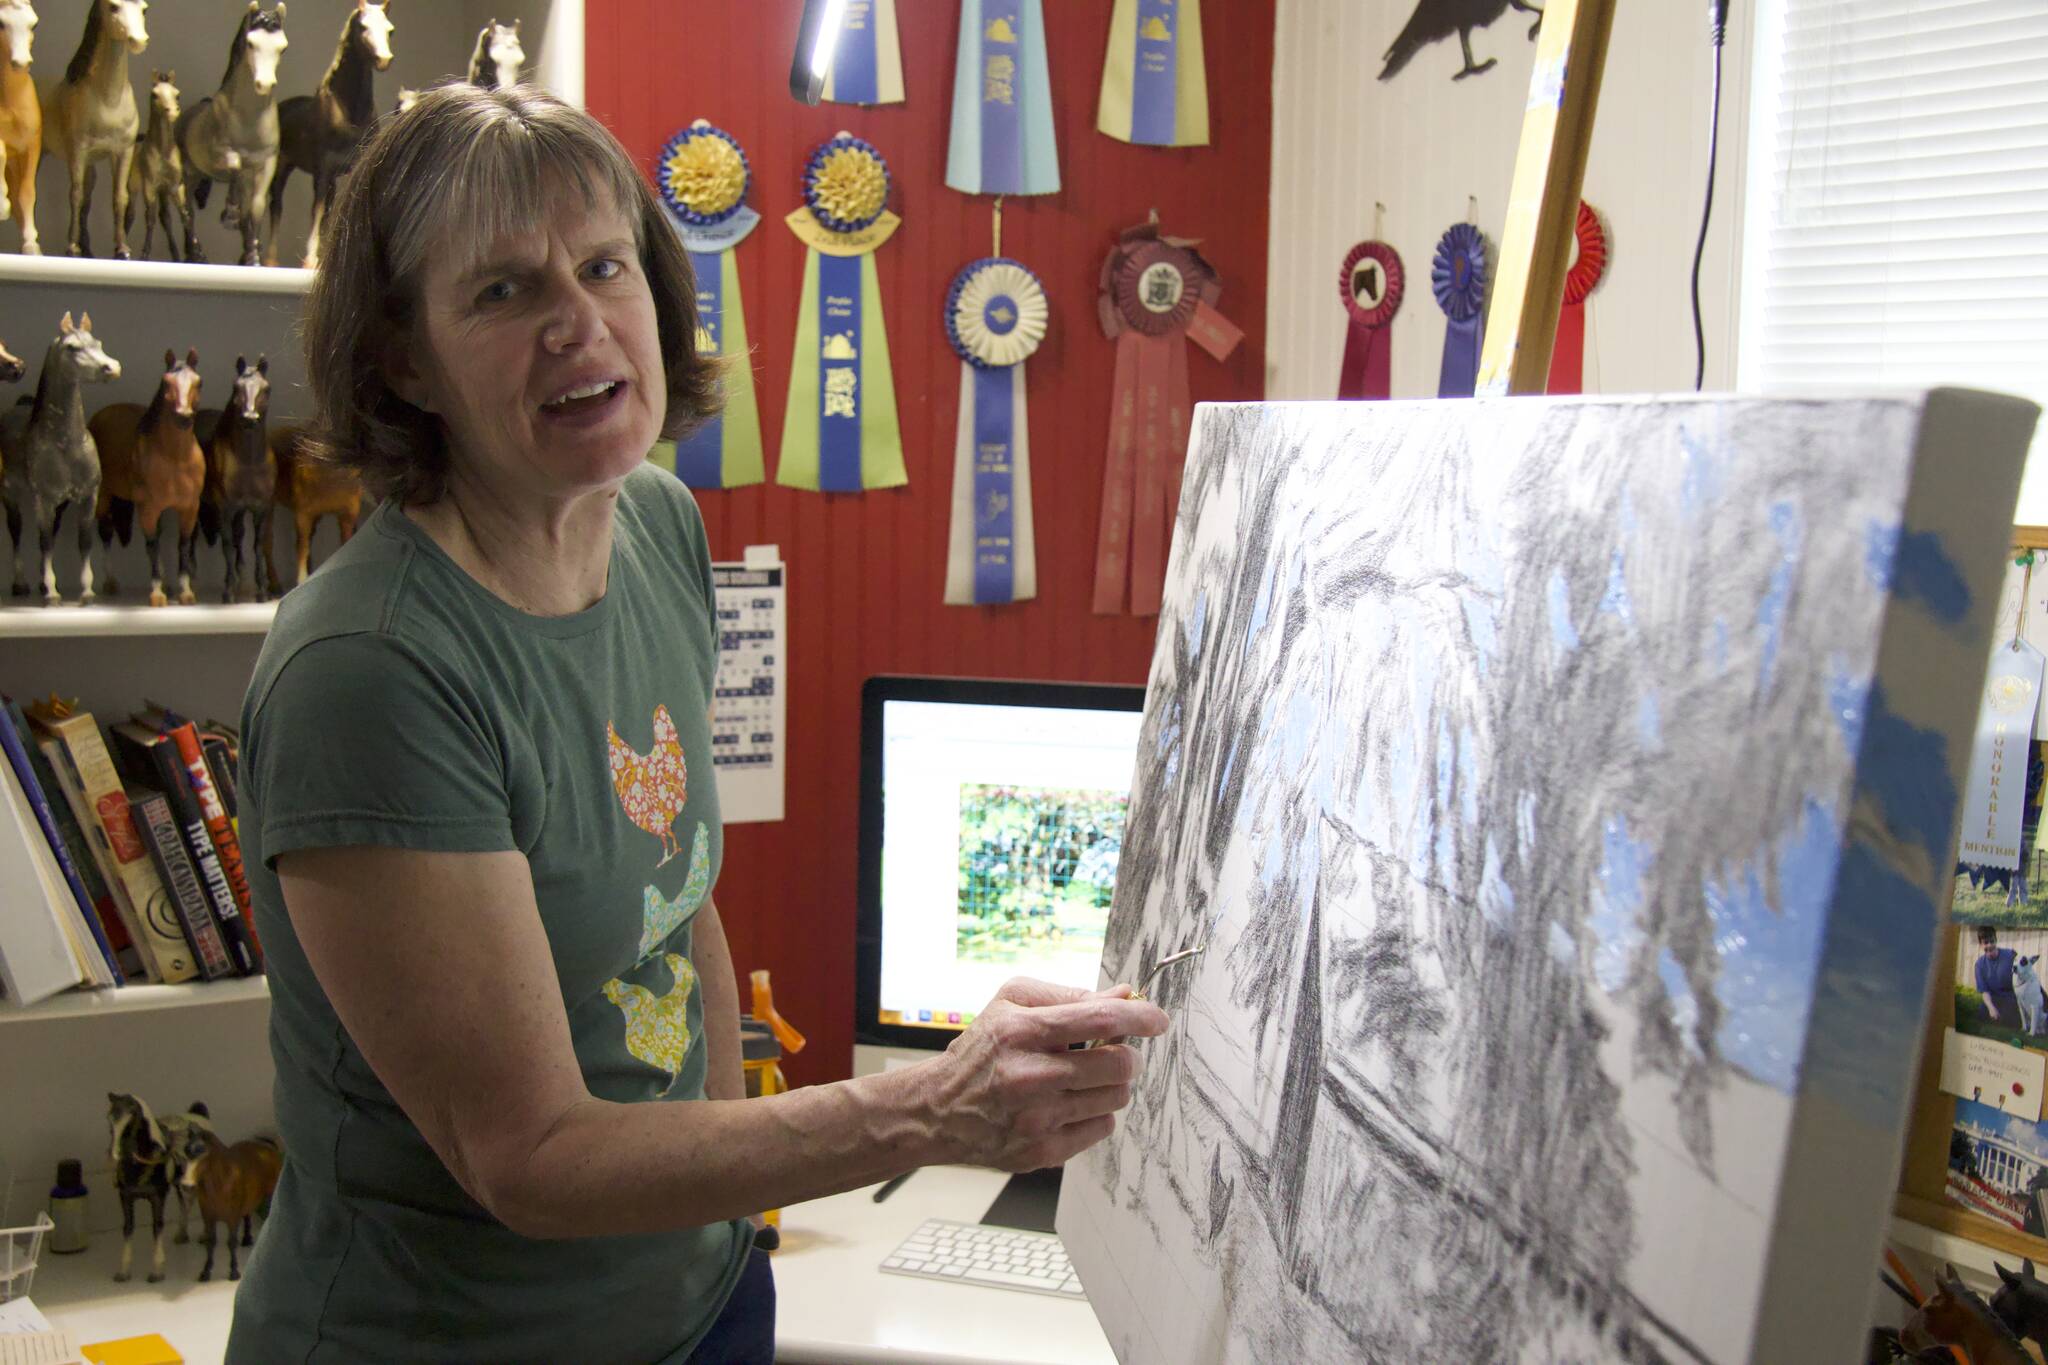 Photo by Rachel Rosen/Whidbey News-Times
Stacey Neumiller works on her latest piece.